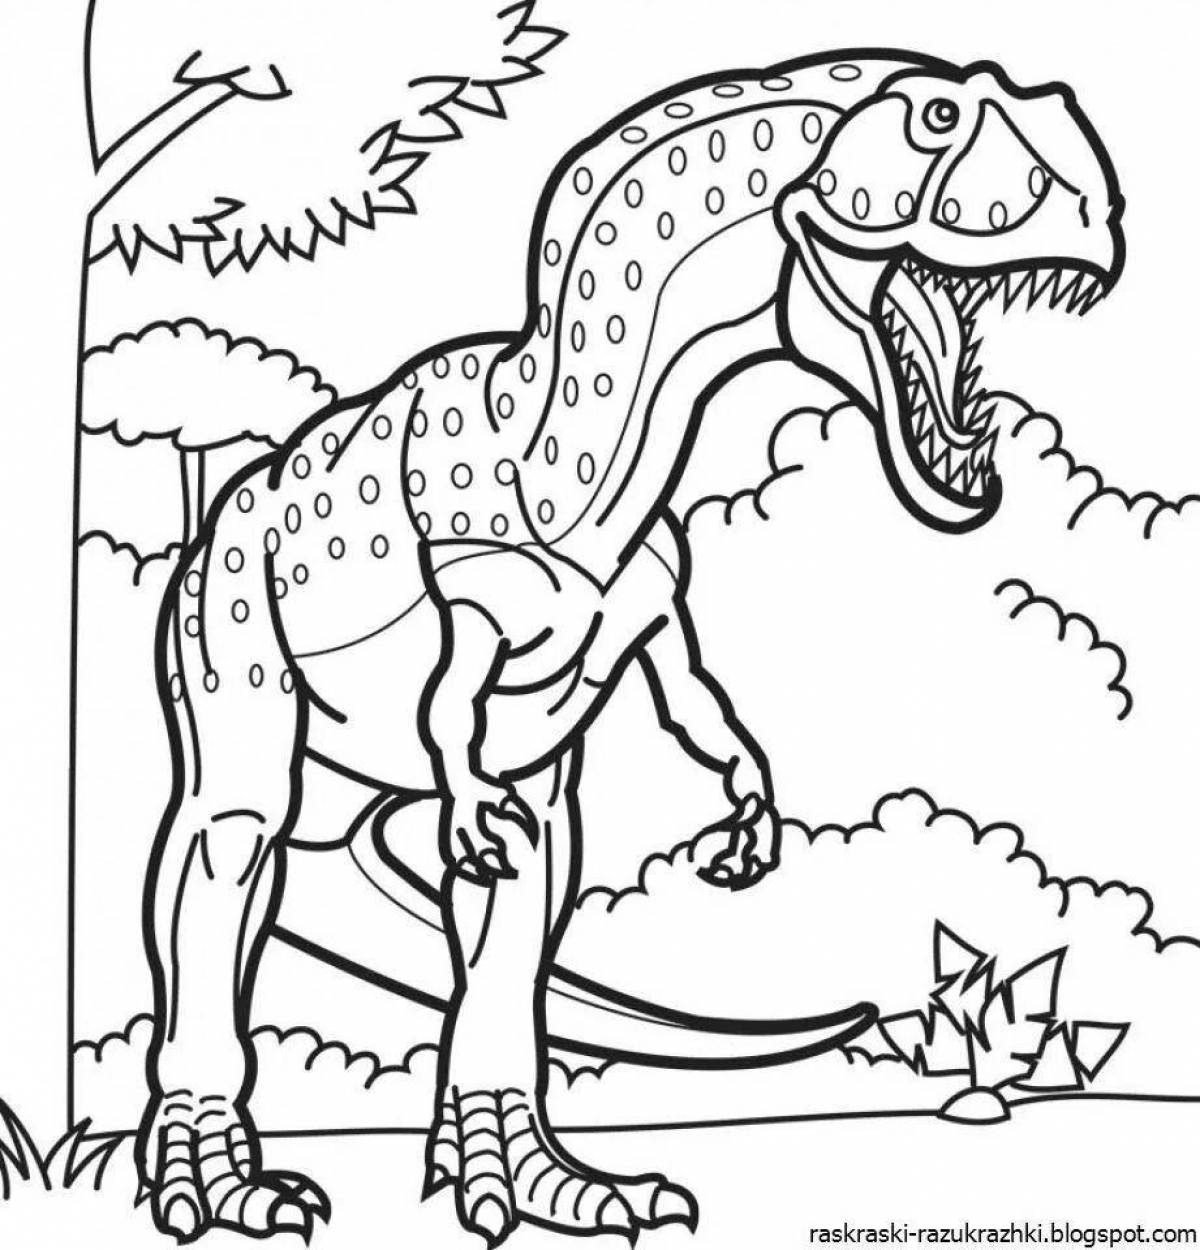 Awesome dinosaur coloring pages for 4-5 year olds